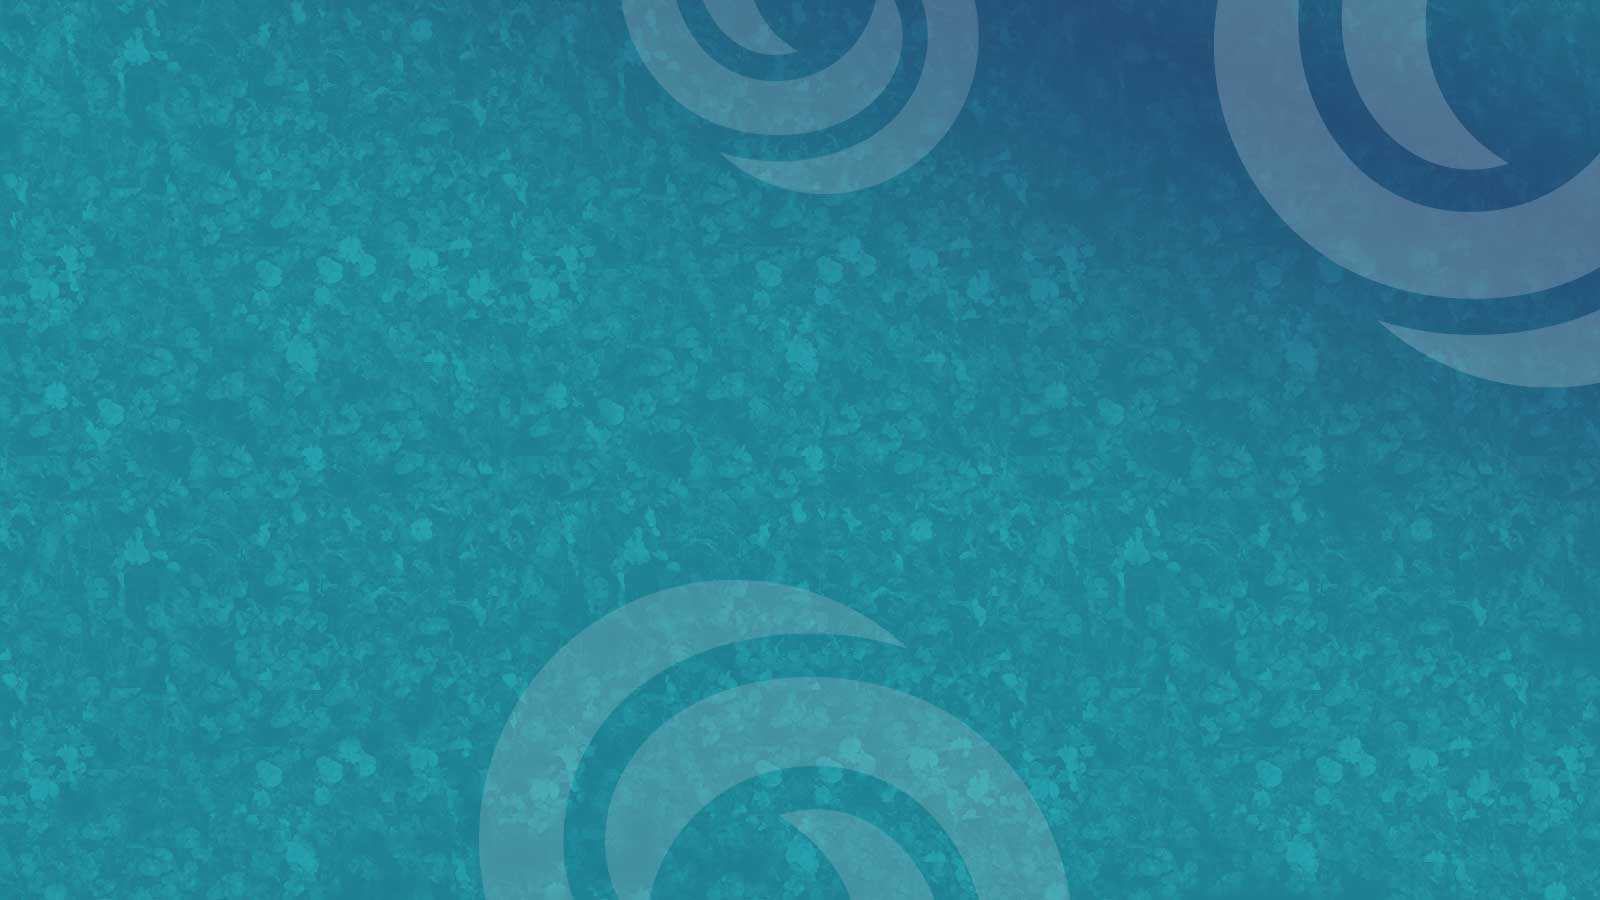 teal textured background with logo spiral